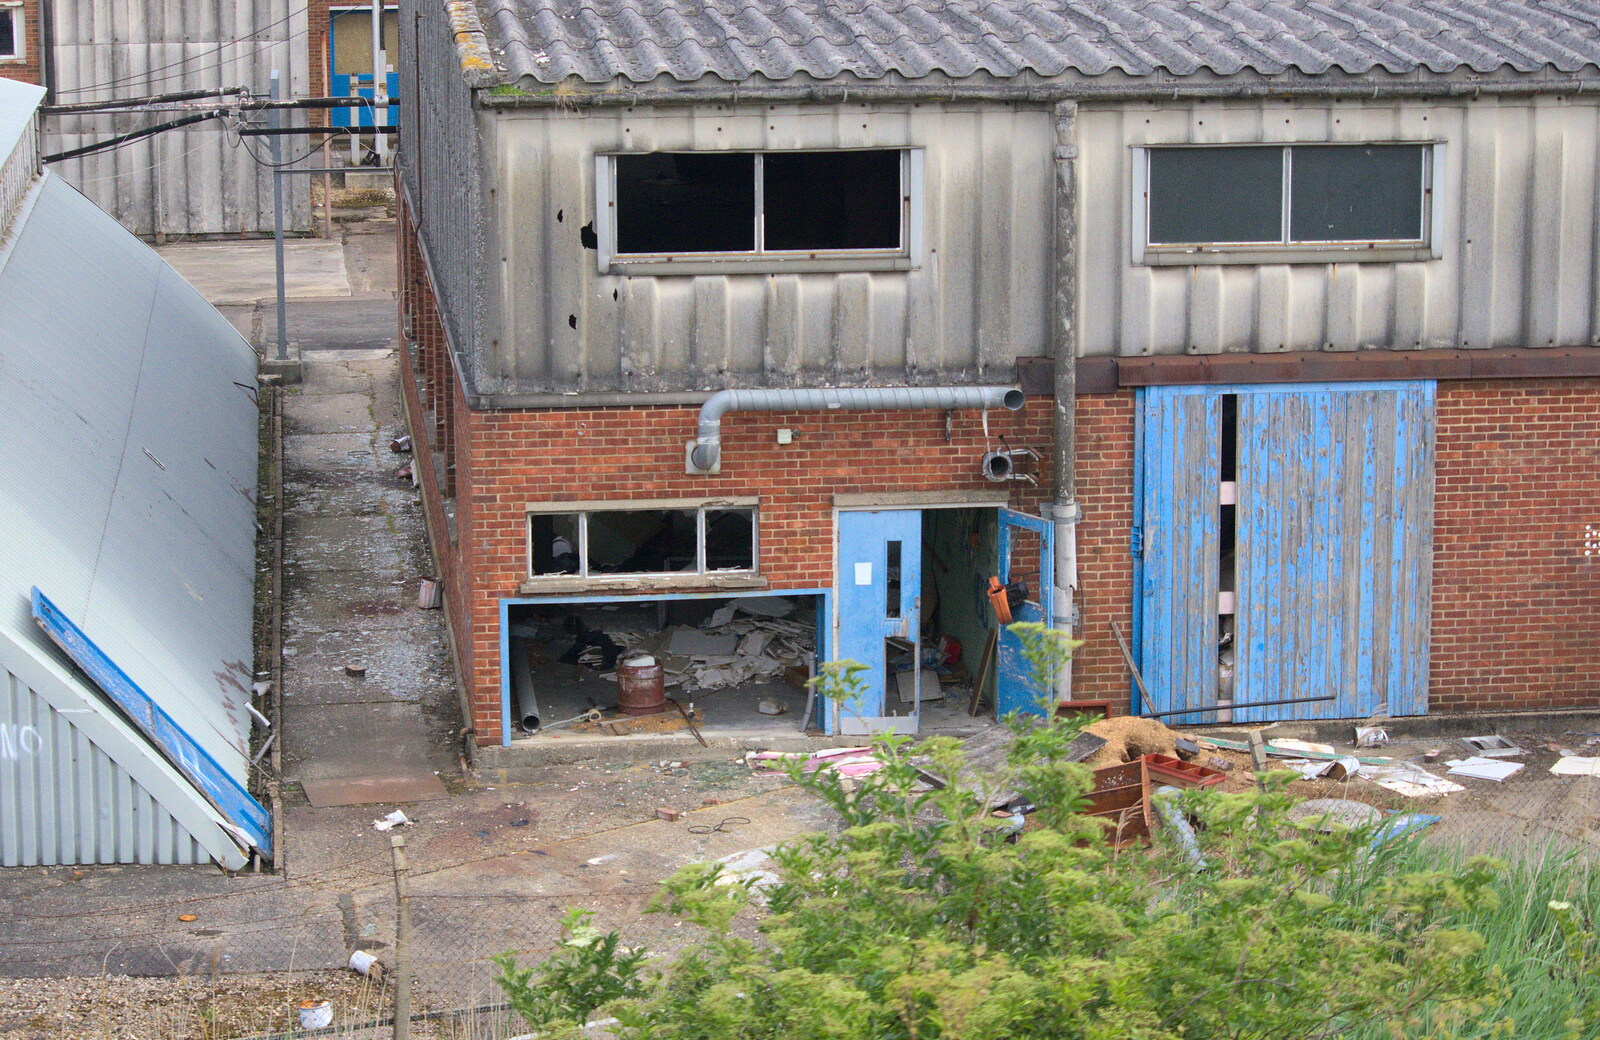 Entropy increases in a derelict building from It's a SwiftKey Knockout, Richmond Rugby Club, Richmond, Surrey - 7th July 2015